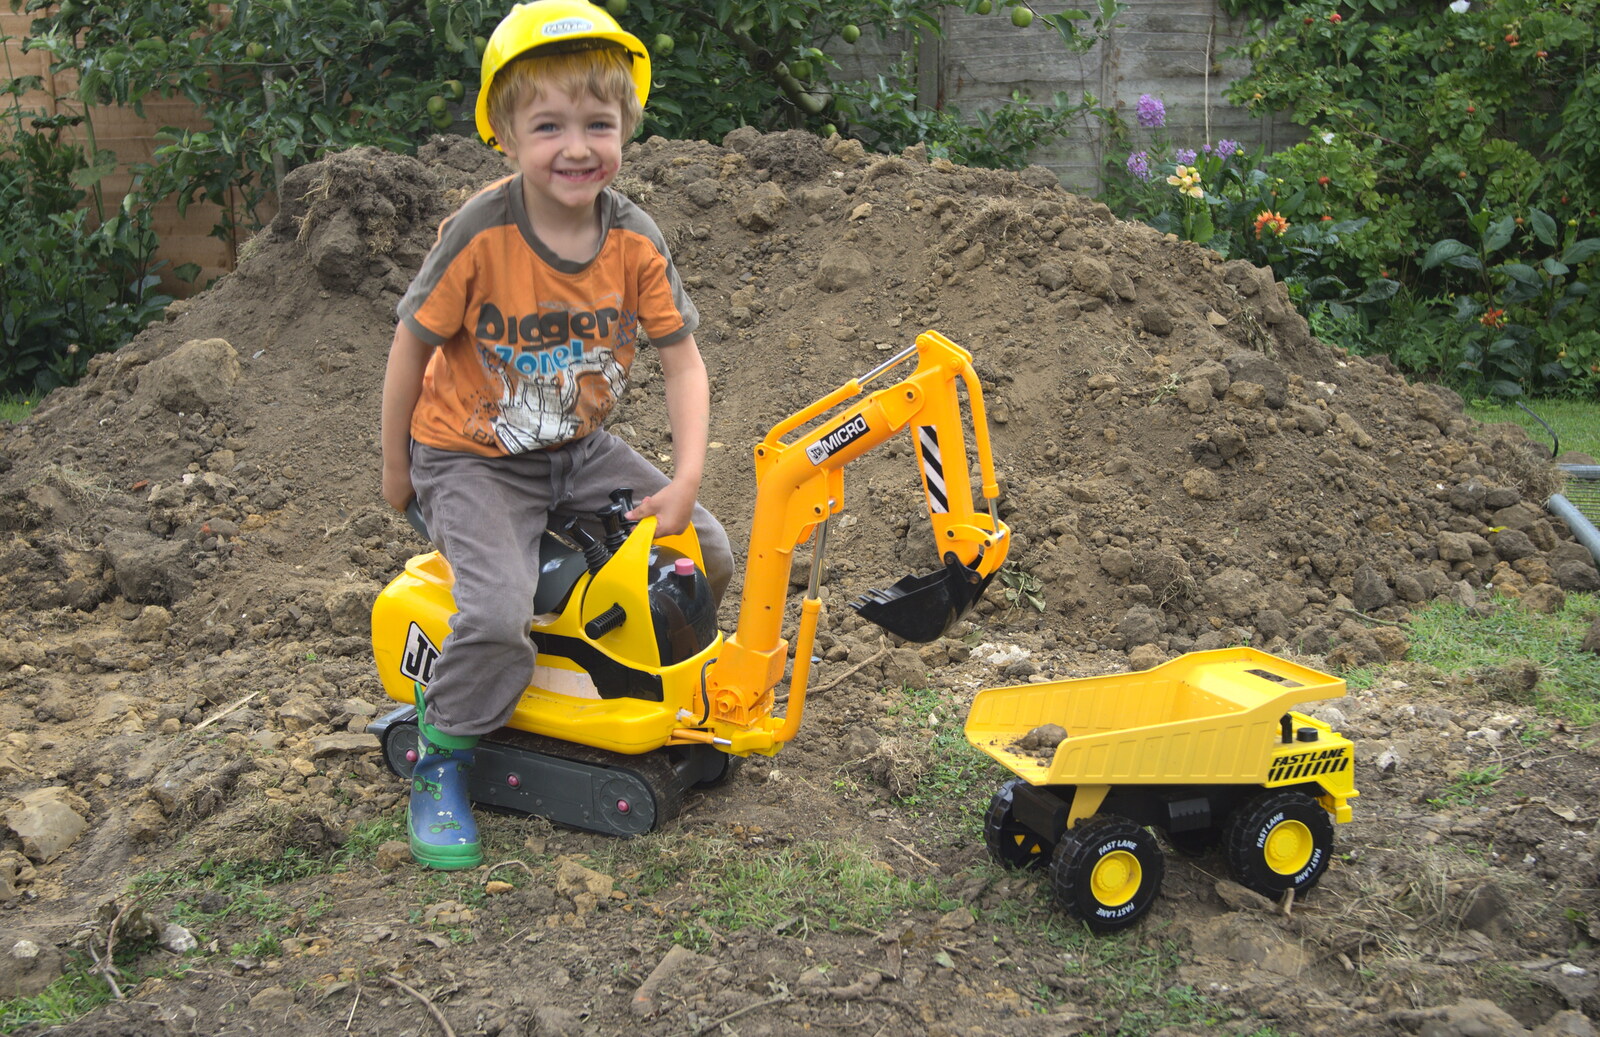 Fred on his digger from Grand Designs: Building Commences, Brome, Suffolk - 8th August 2013